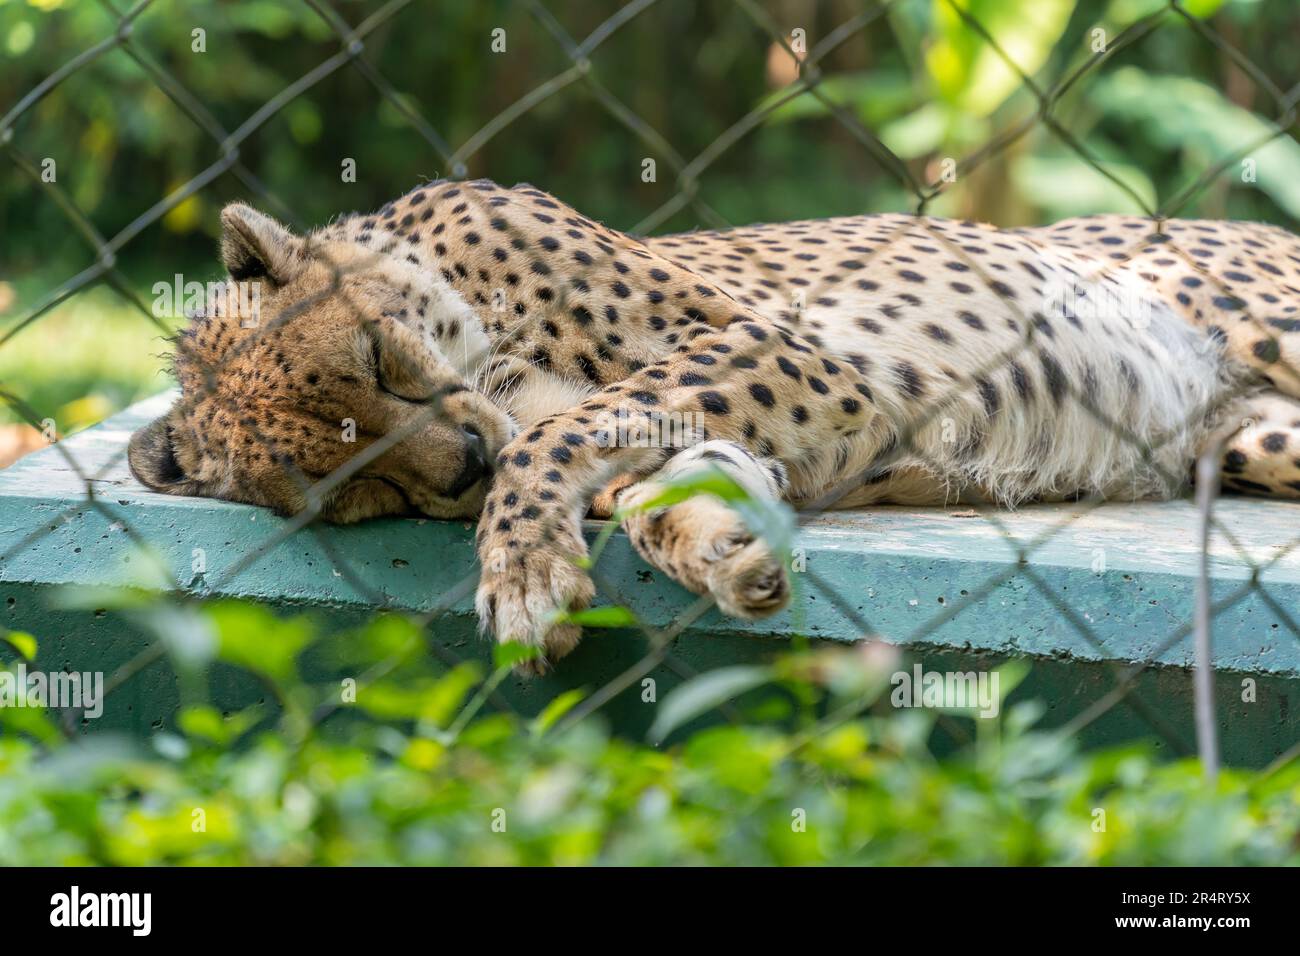 Close-up view of the King Cheetahs sleeping on the platform. Stock Photo